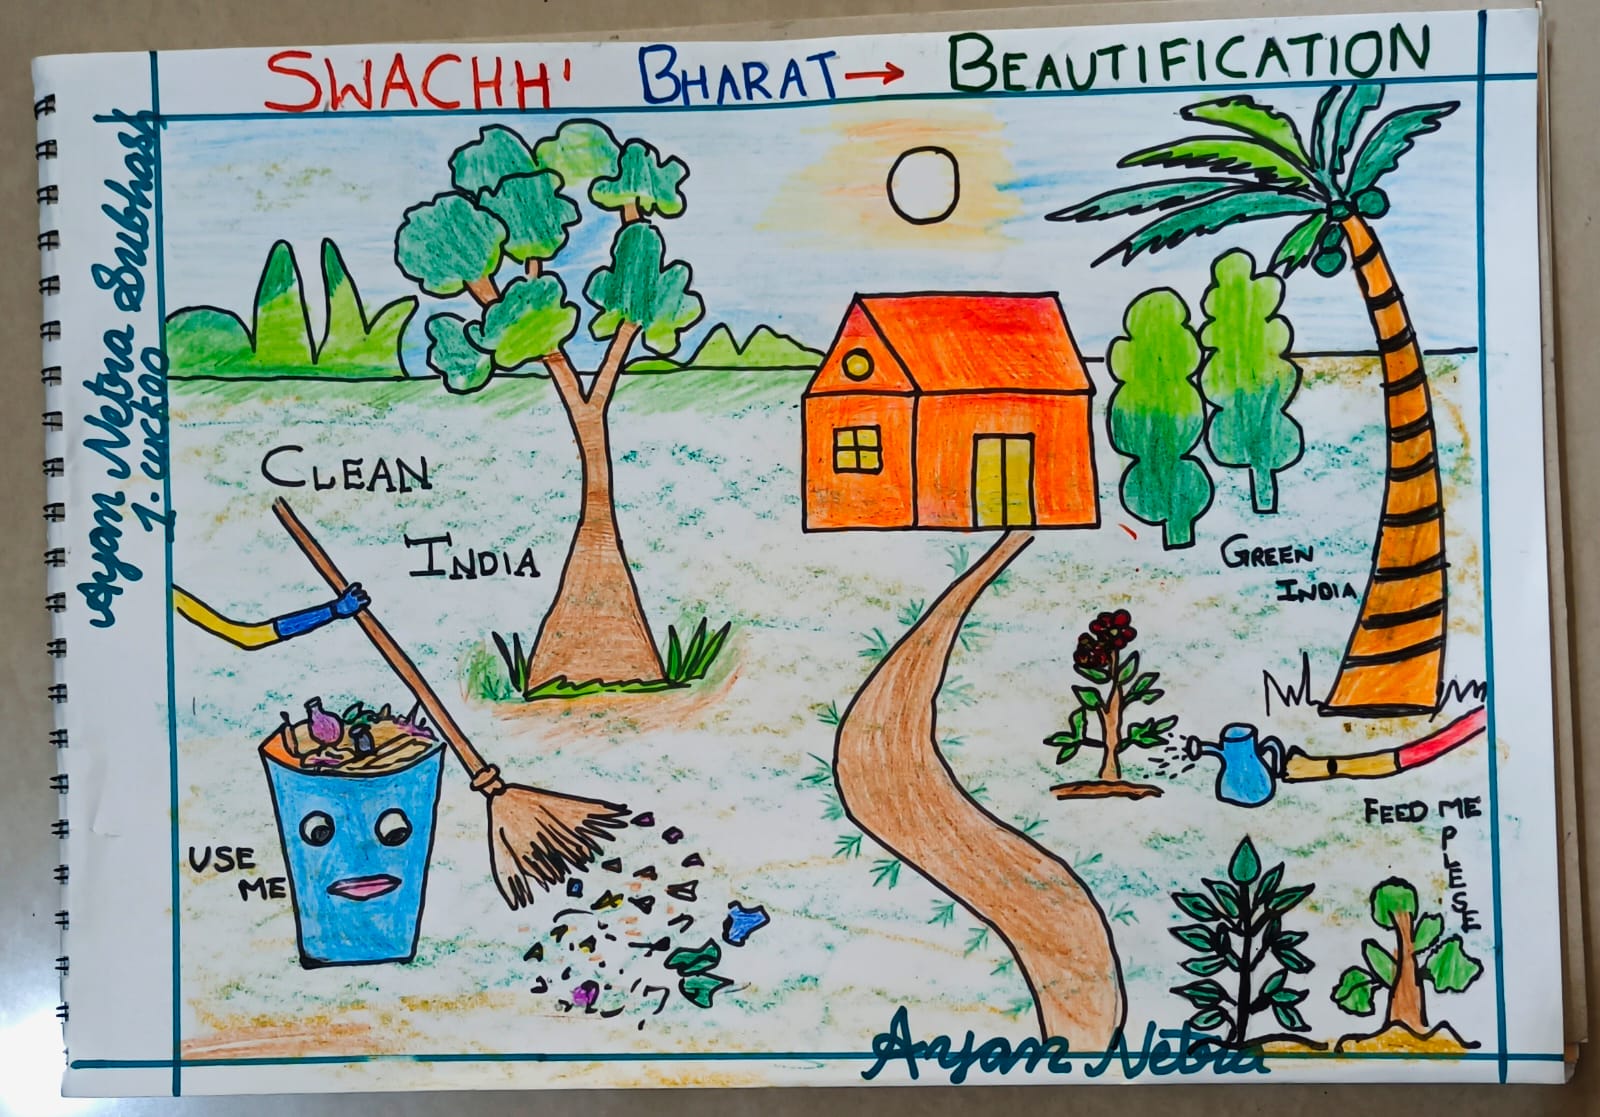 Swachhbharat Images :: Photos, videos, logos, illustrations and branding ::  Behance